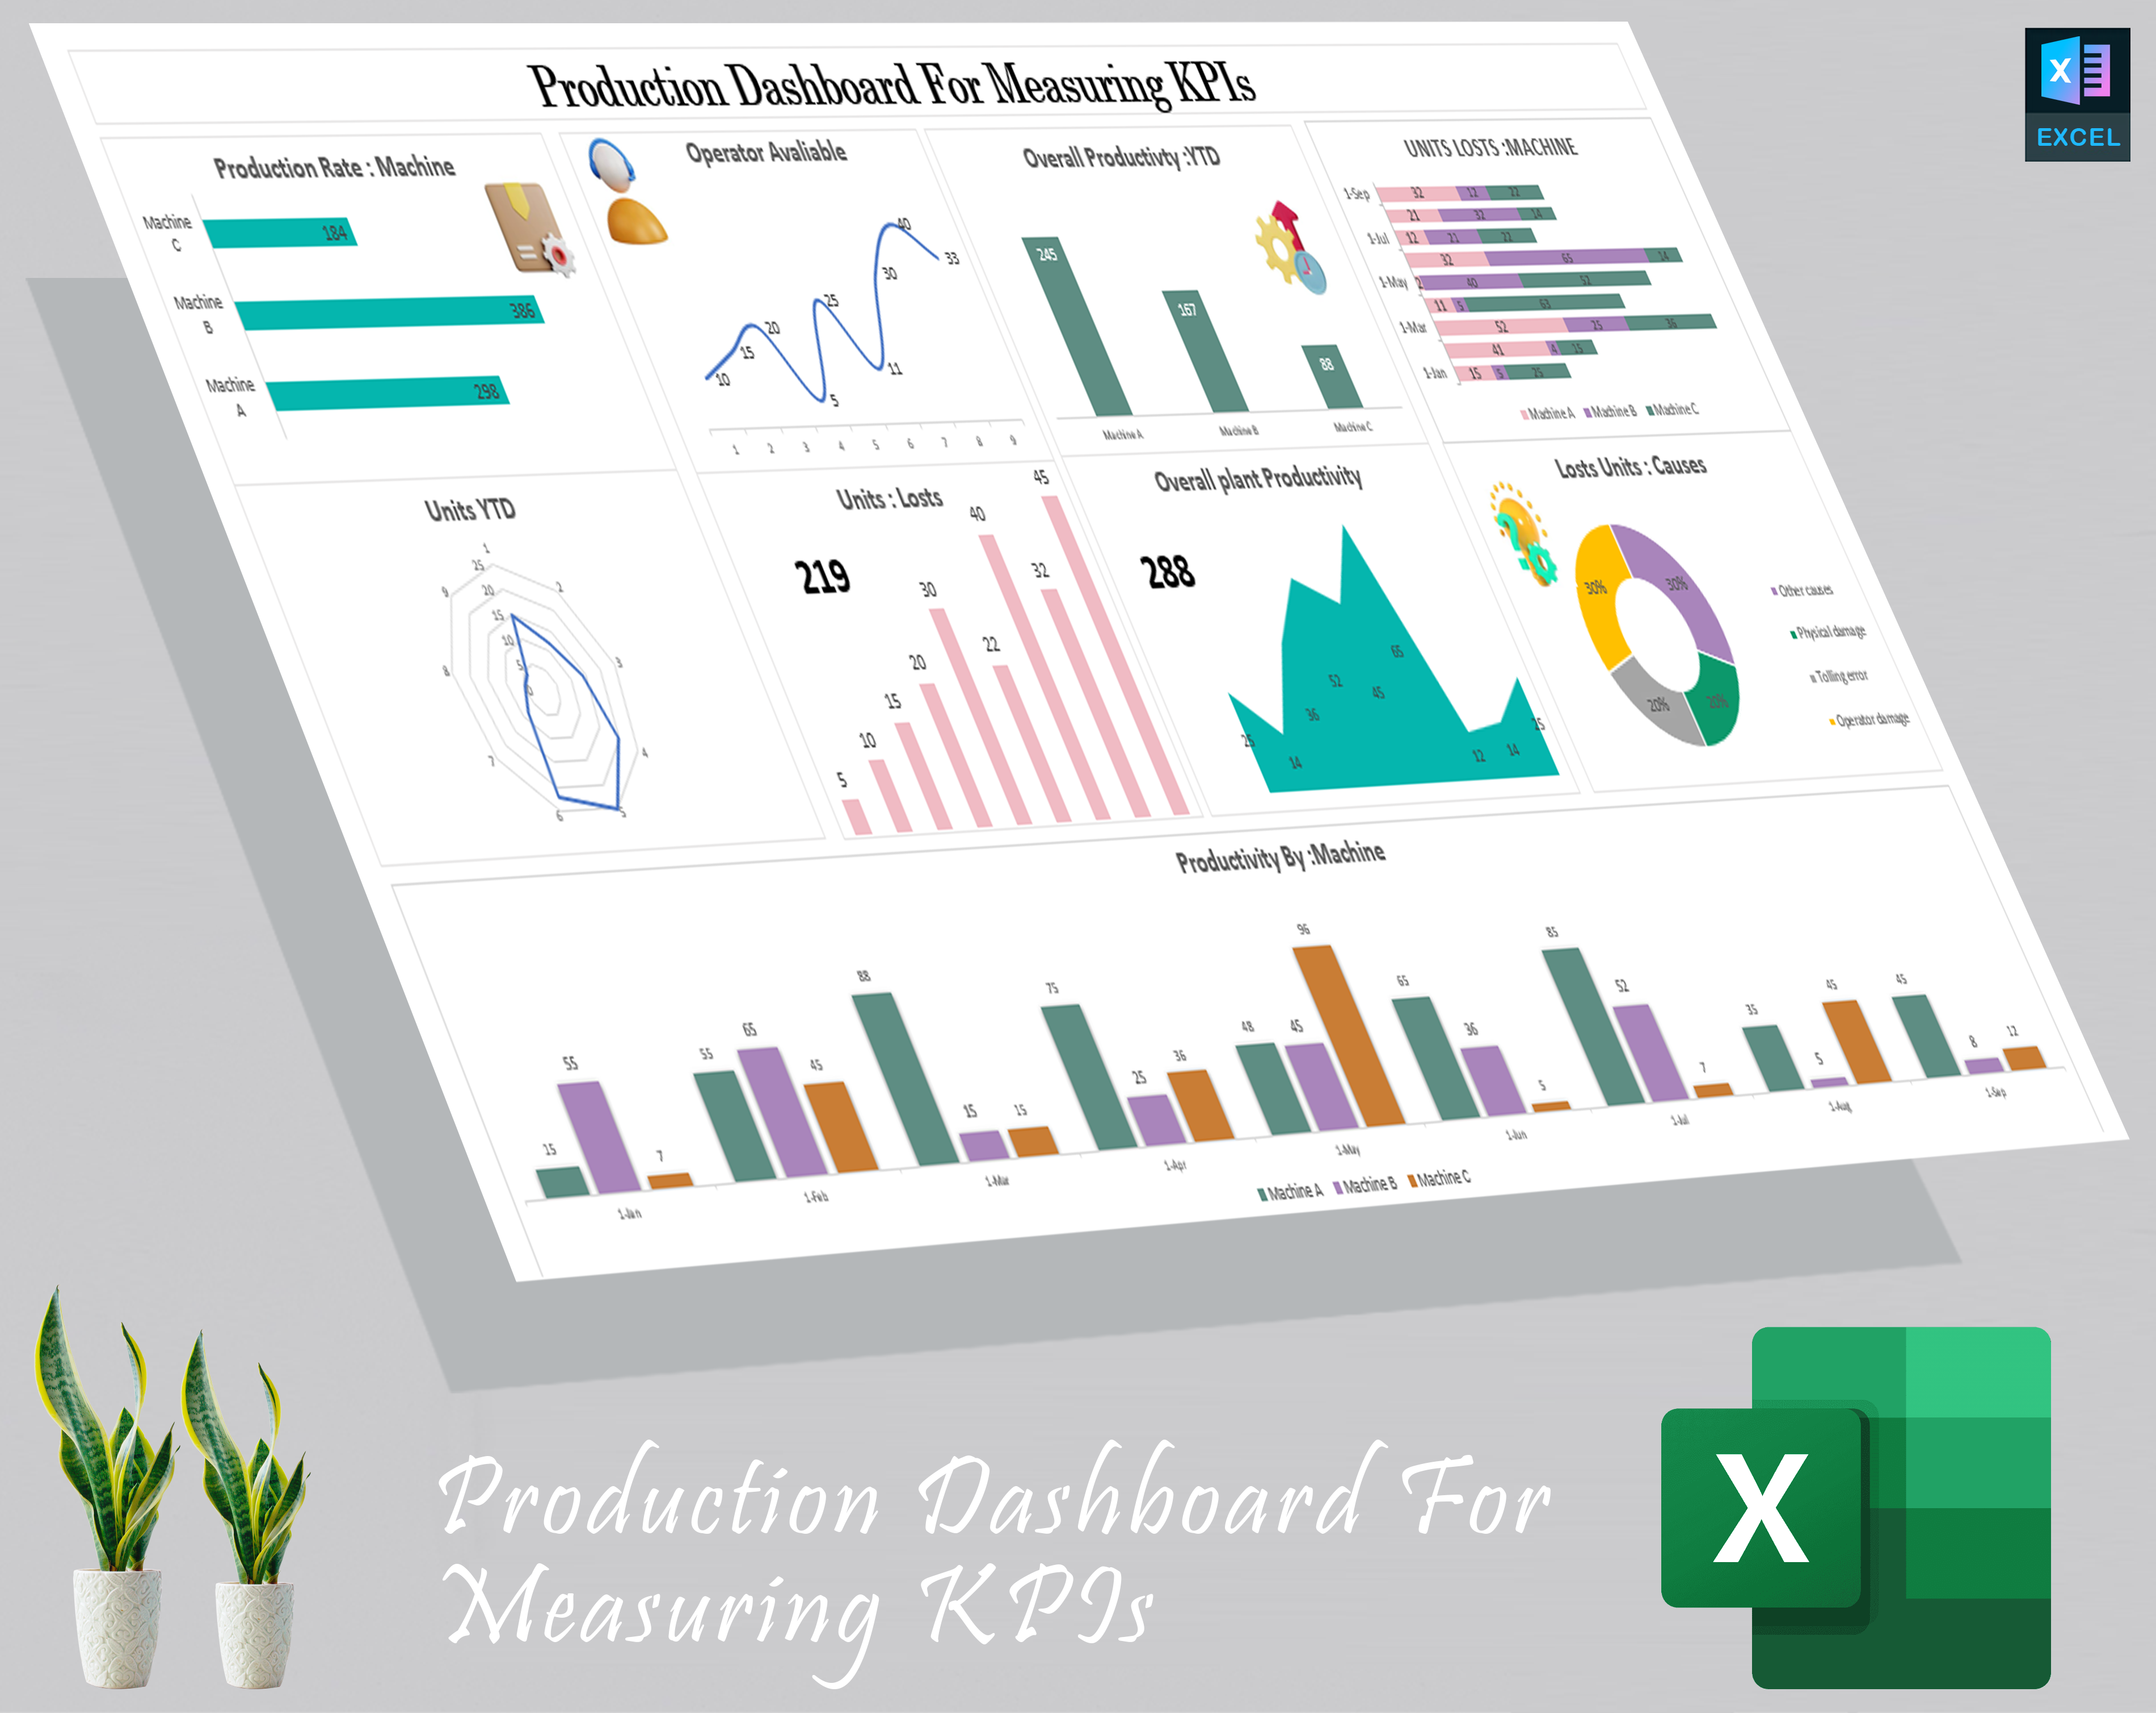 Production Dashboard For Measuring KPIs